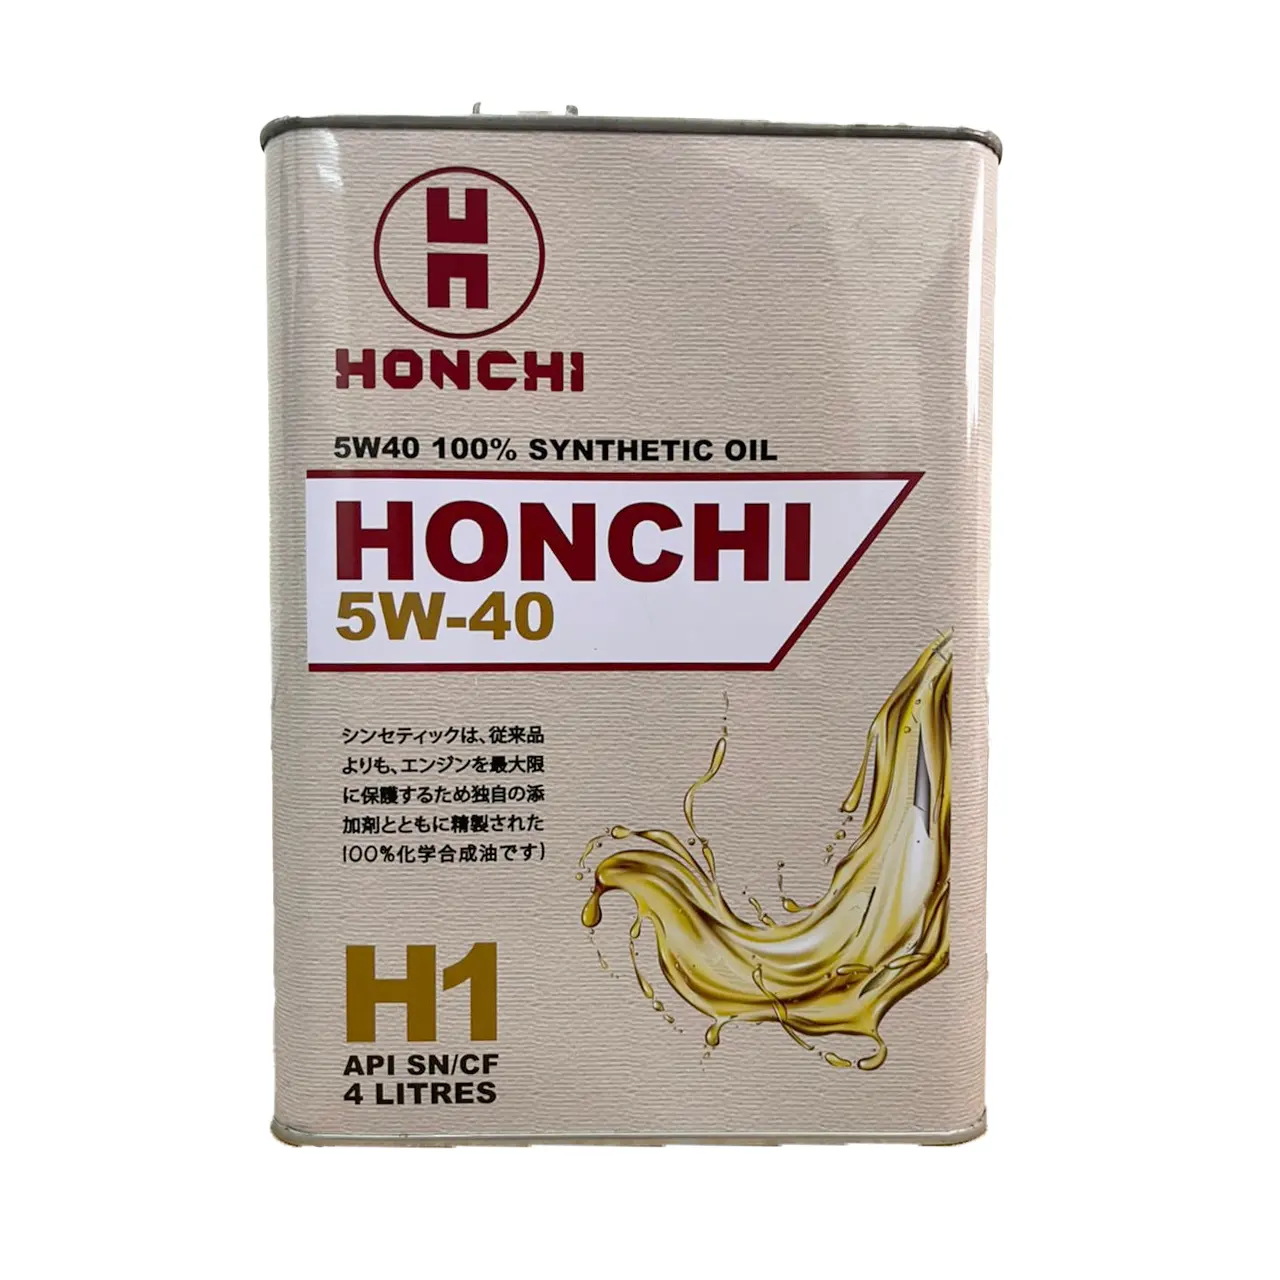 HONCHI 5W40 High Performance Lubricant Engine Oil Synthetic Lubricants API SP ILSACGF-6A Lubricant Oil Metal Can 4L